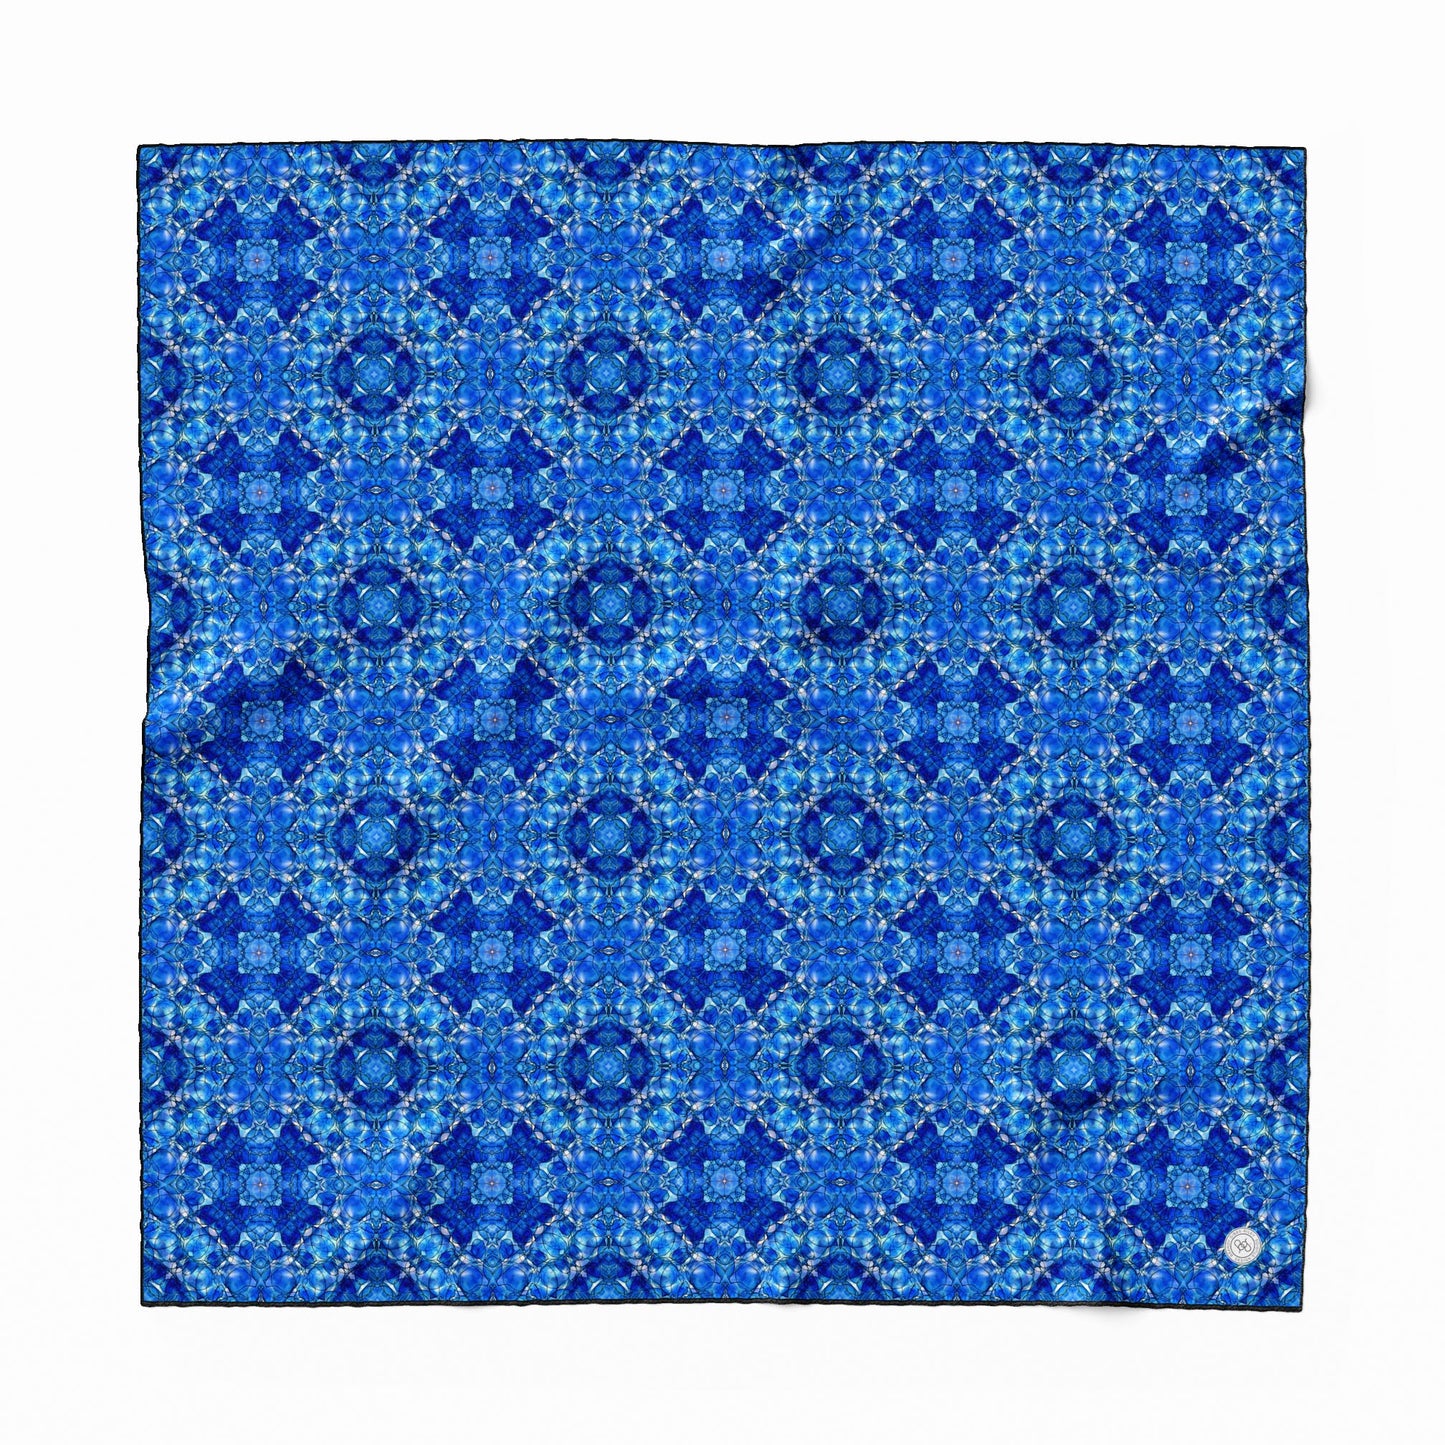 Silk scarf featuring a hand-painted cobalt blue pattern.